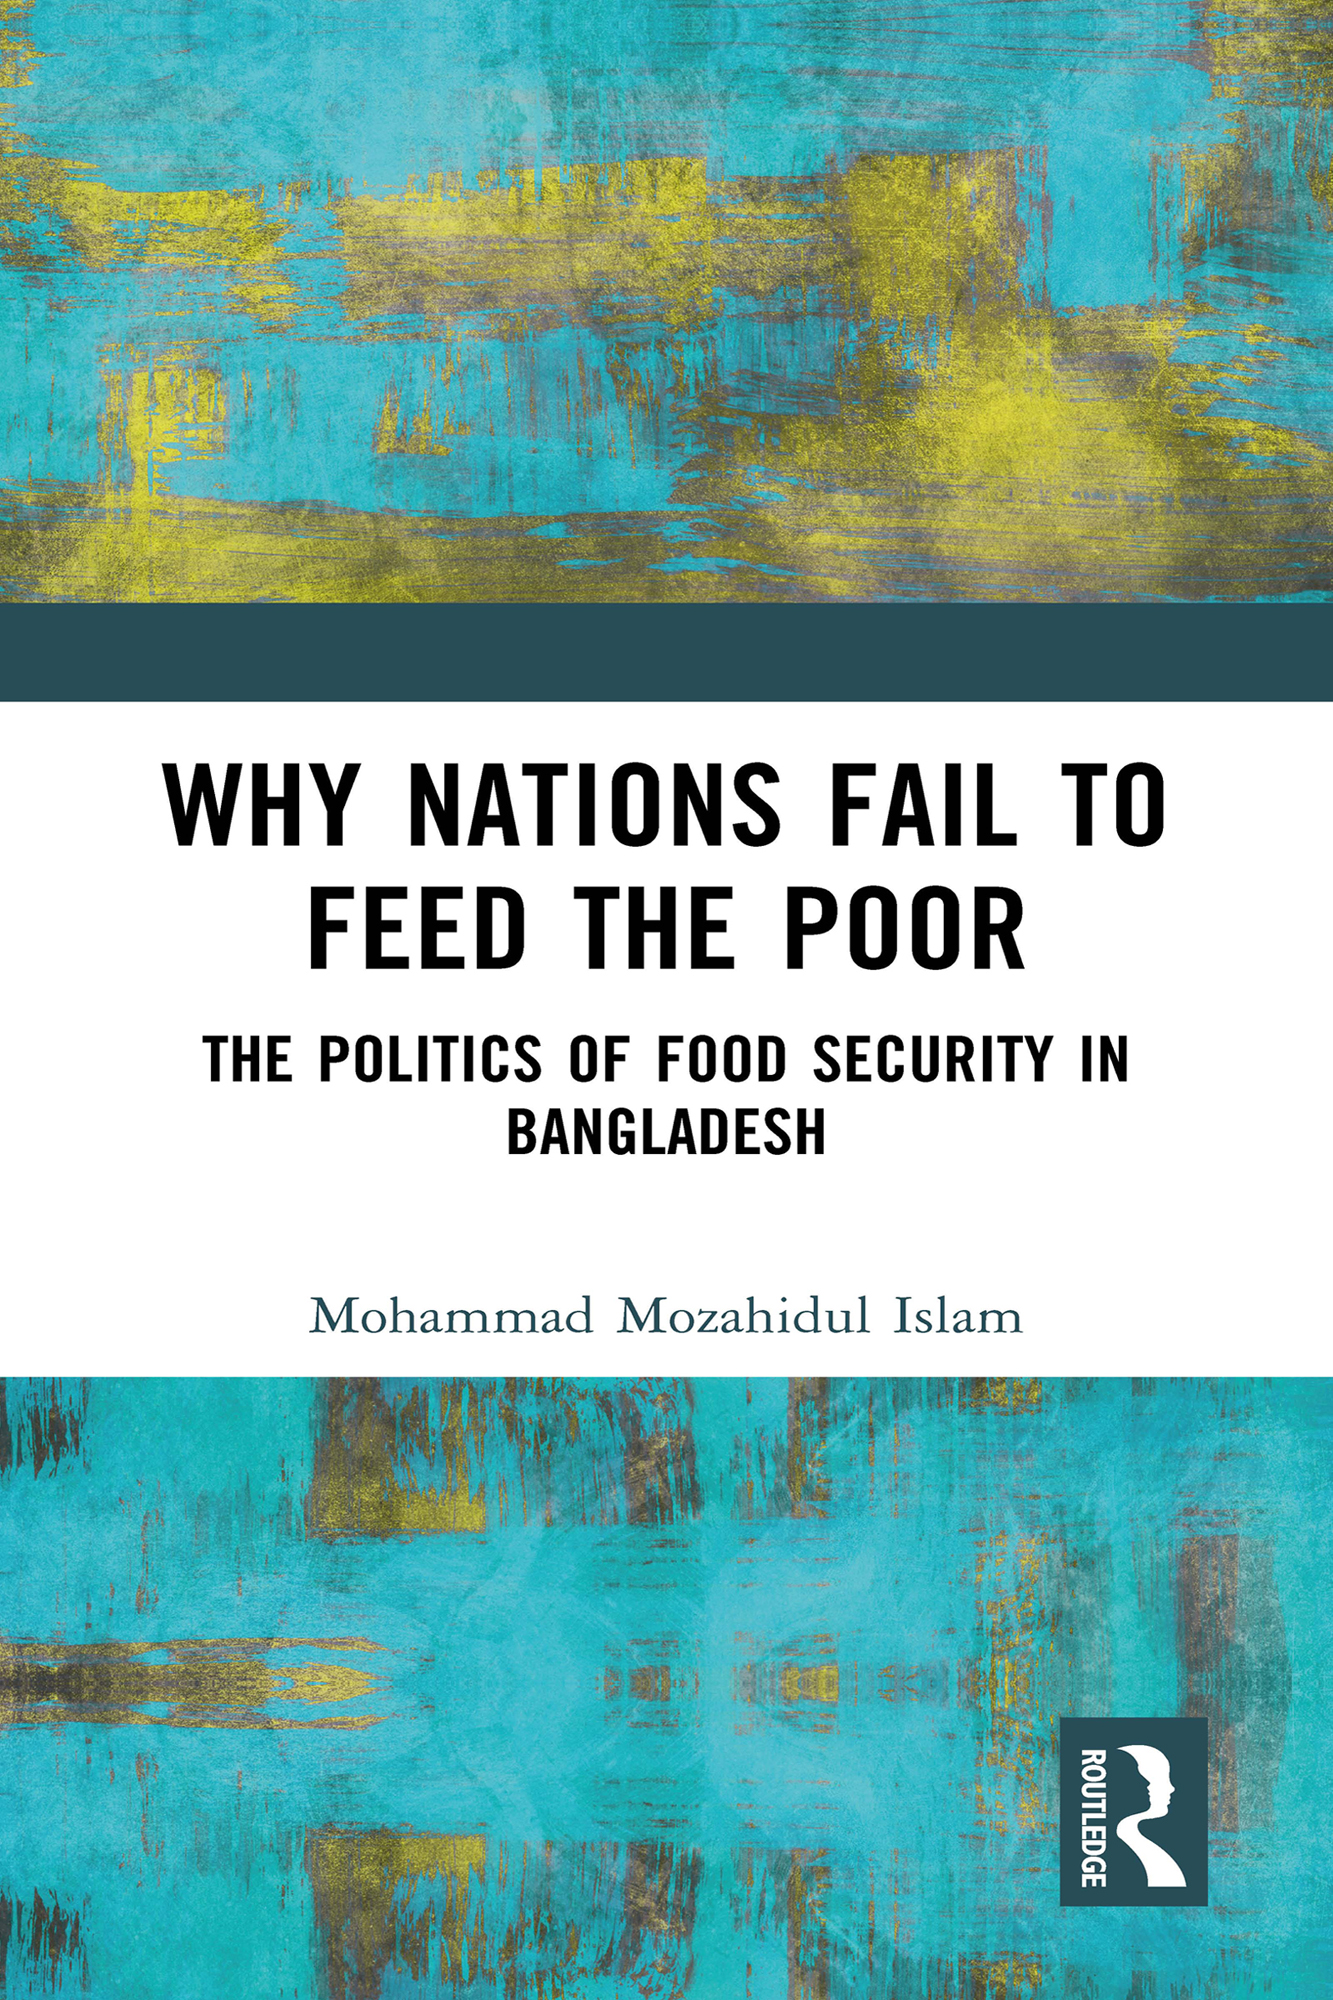 Why Nations Fail to Feed the Poor